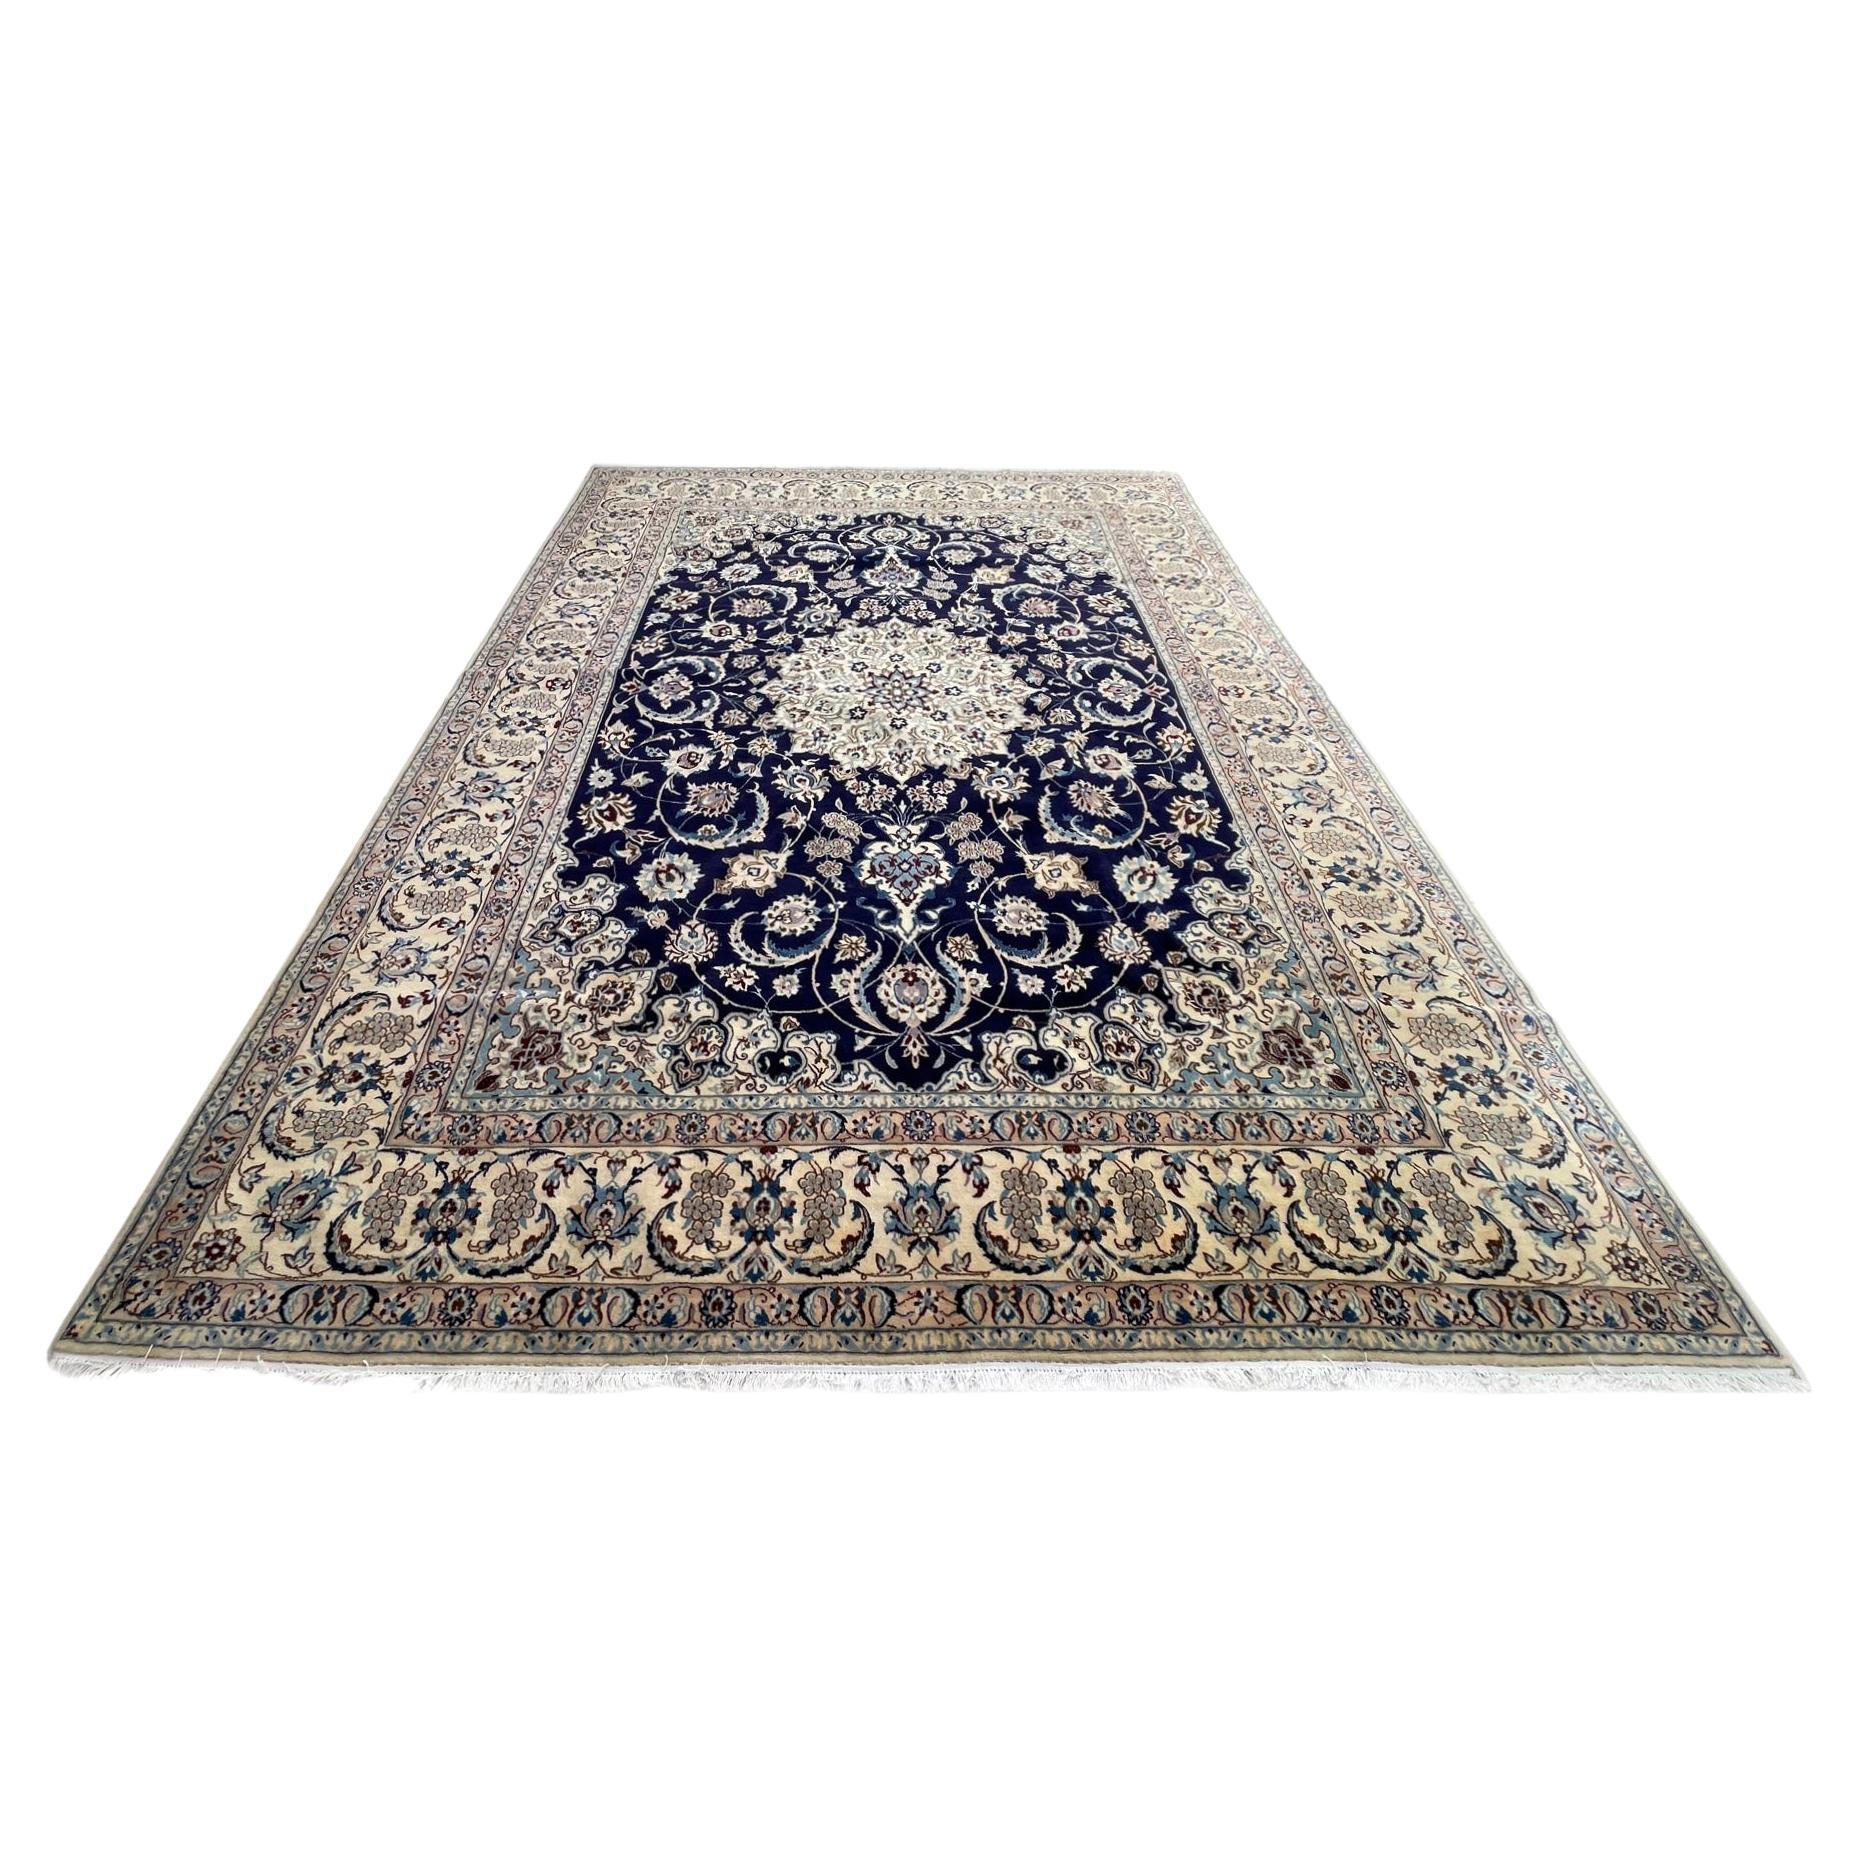 https://a.1stdibscdn.com/persian-hand-knotted-medallion-floral-cream-blue-nain-rug-1970-circa-for-sale/f_9366/f_345488221685577274624/f_34548822_1685577275199_bg_processed.jpg